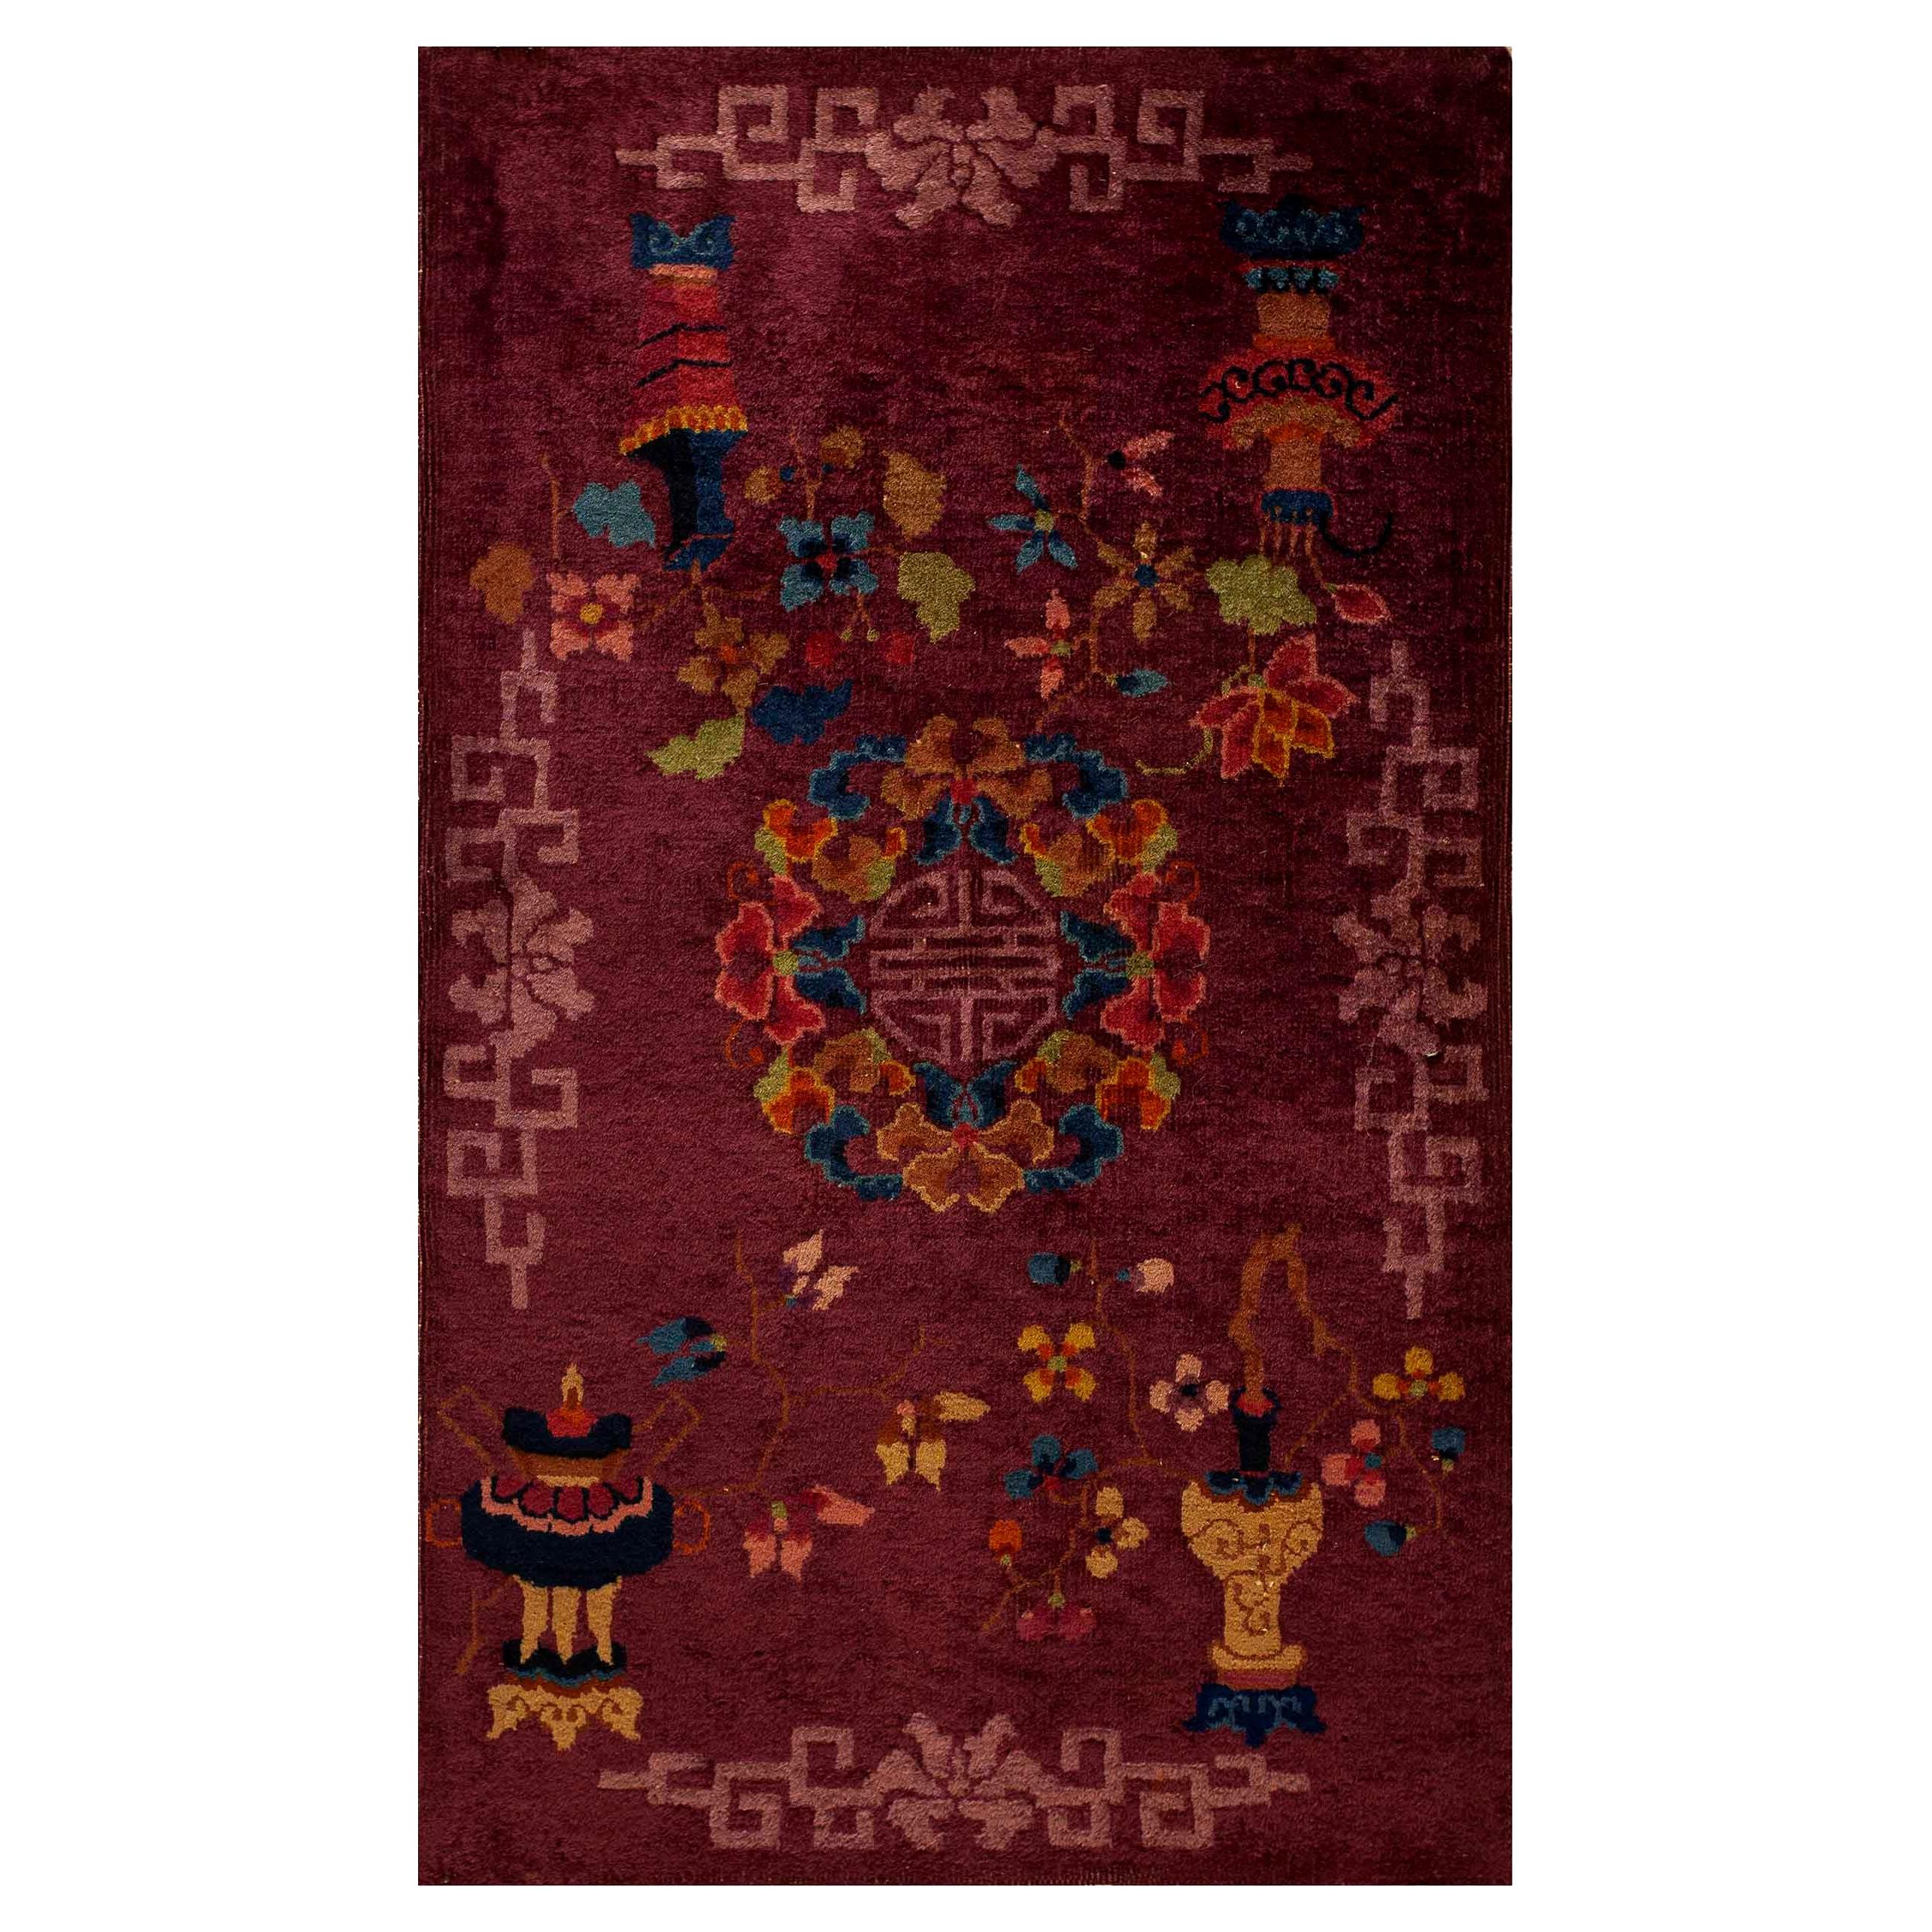 1920s Chinese Art Deco Rug ( 2'4" x 4' - 70 x 122 ) For Sale